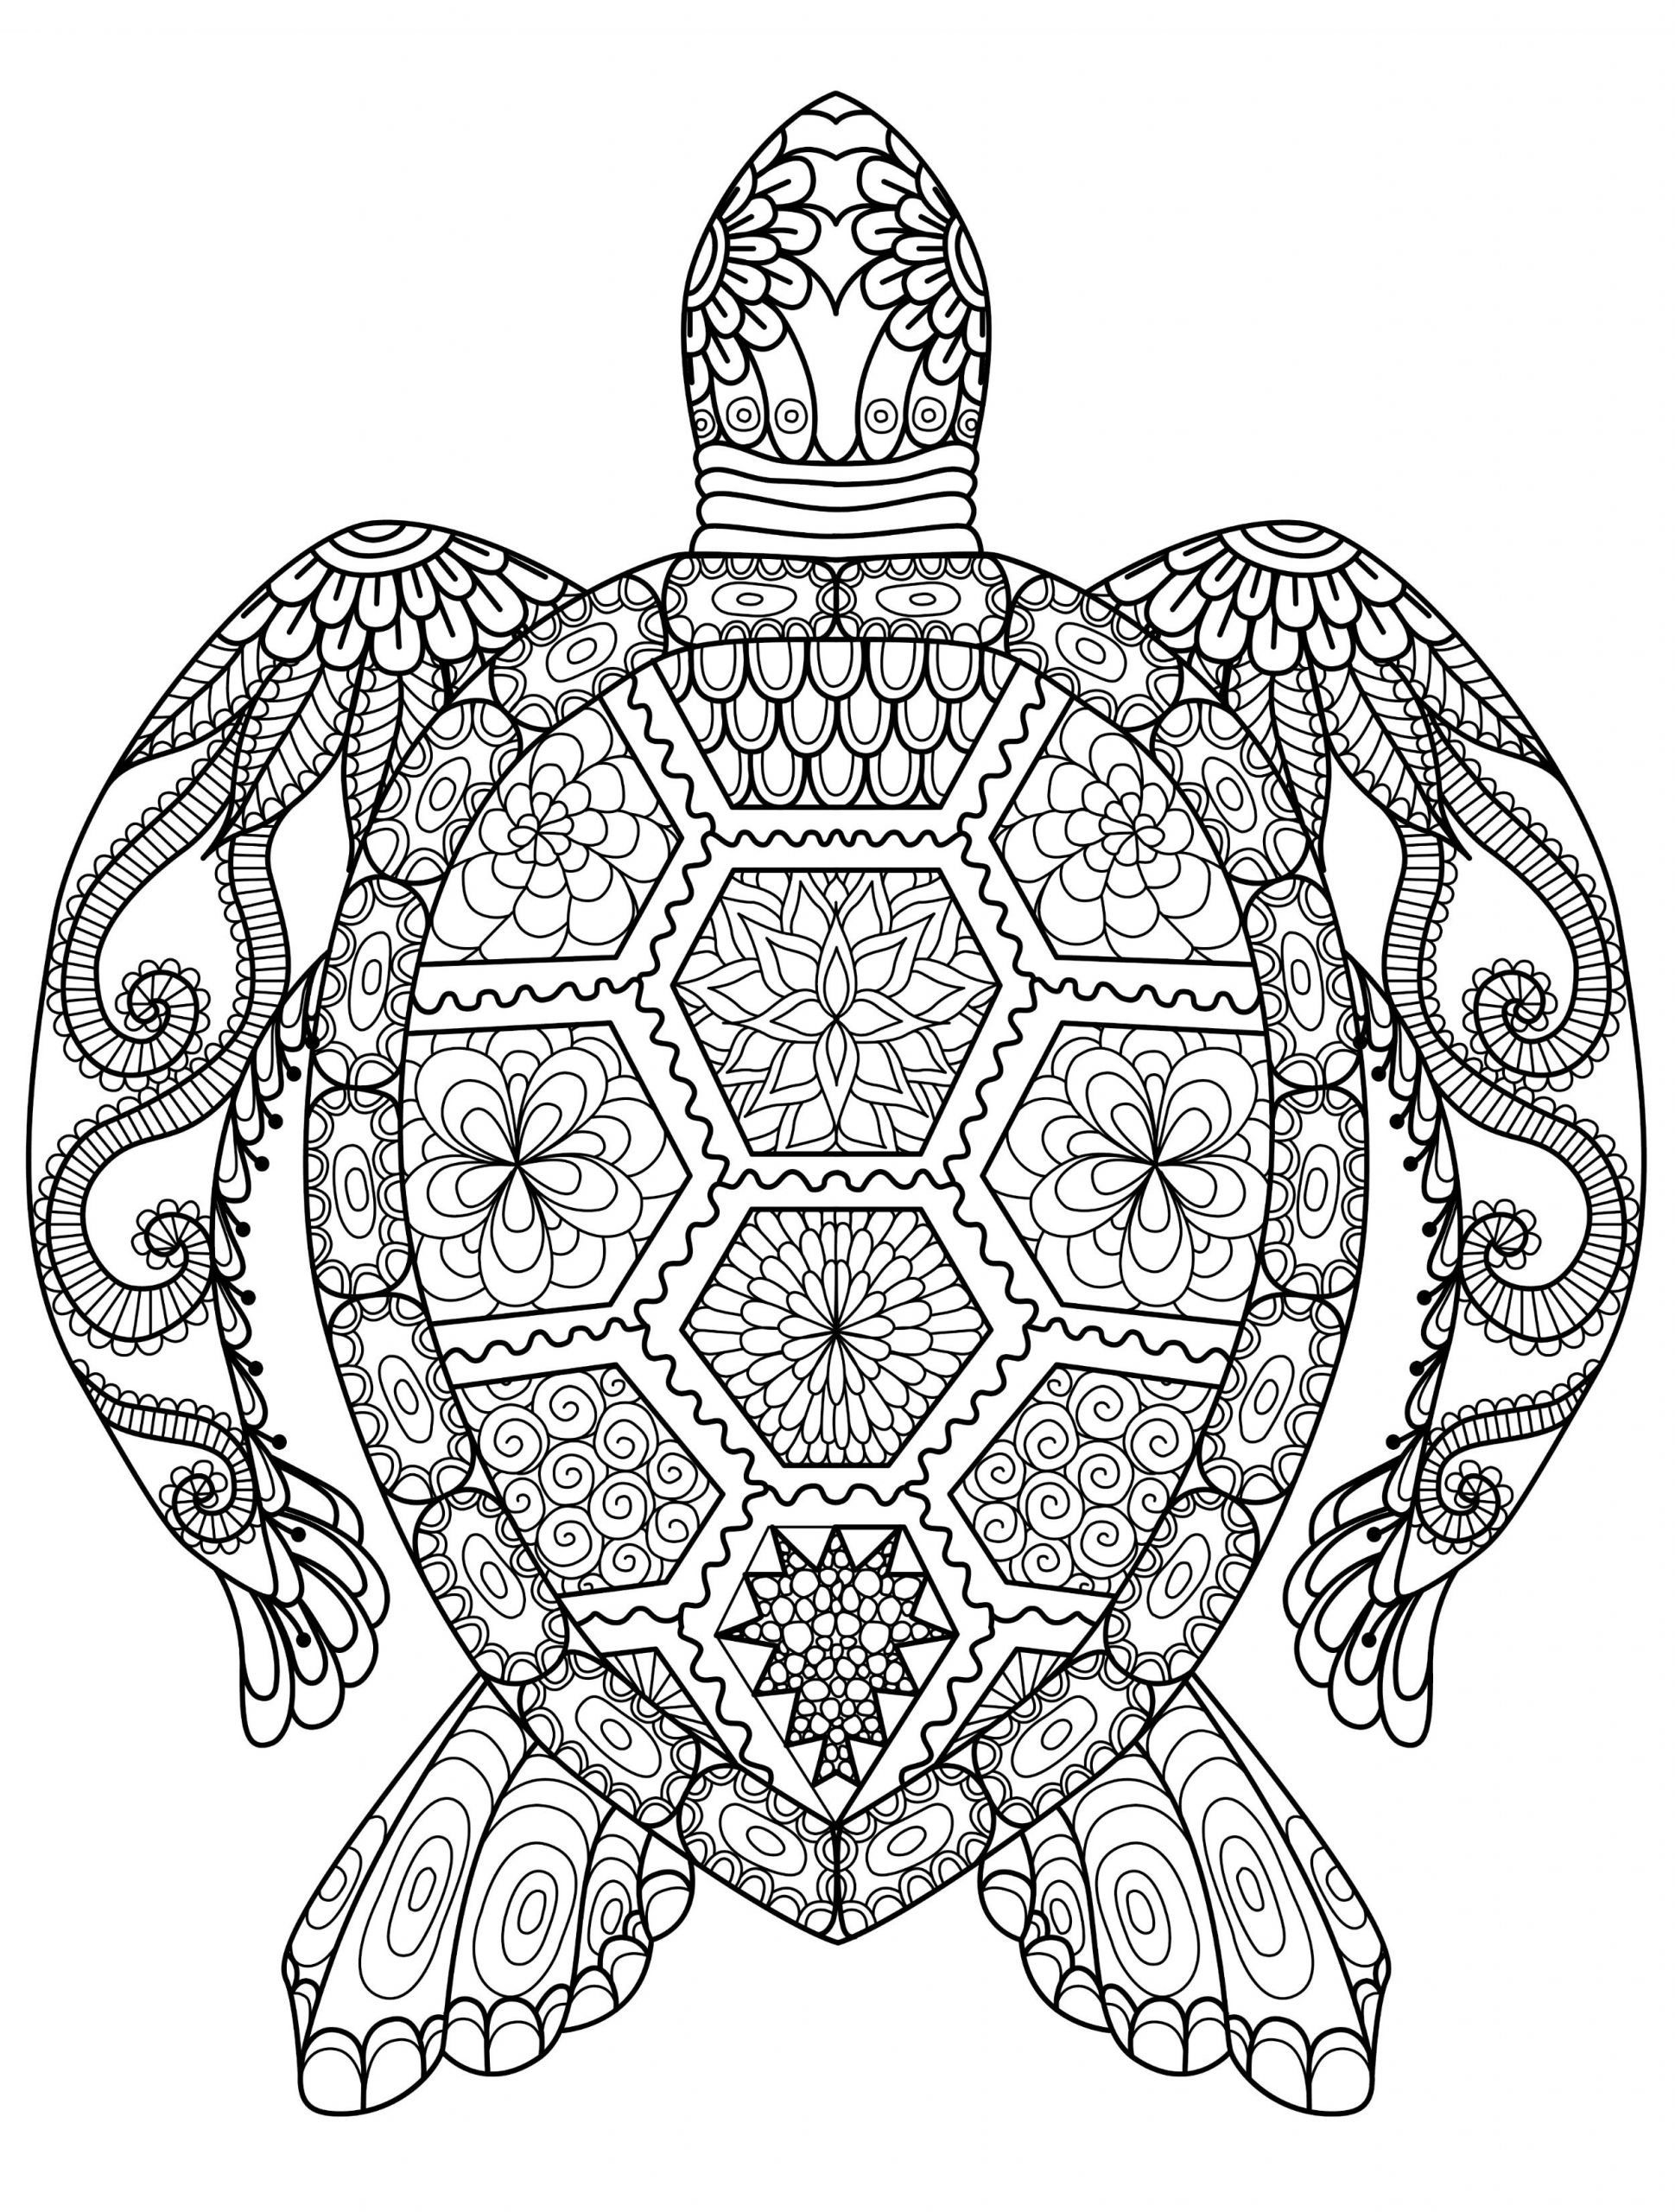 Coloring Sheet For Adults
 Adult Coloring Pages Animals Best Coloring Pages For Kids